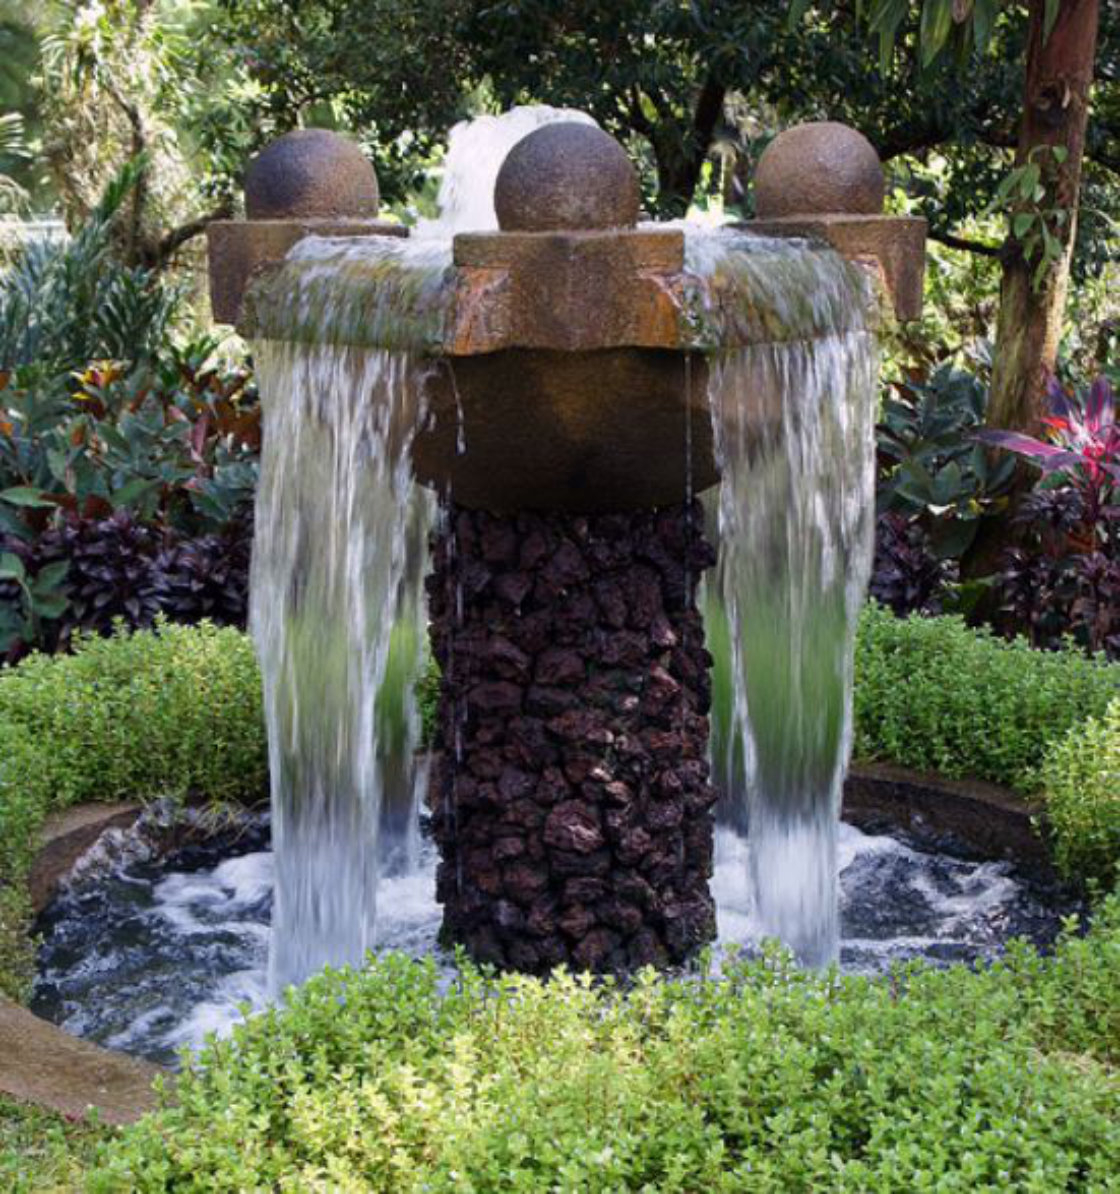 10 relaxing and decorative outdoor water fountains rilane